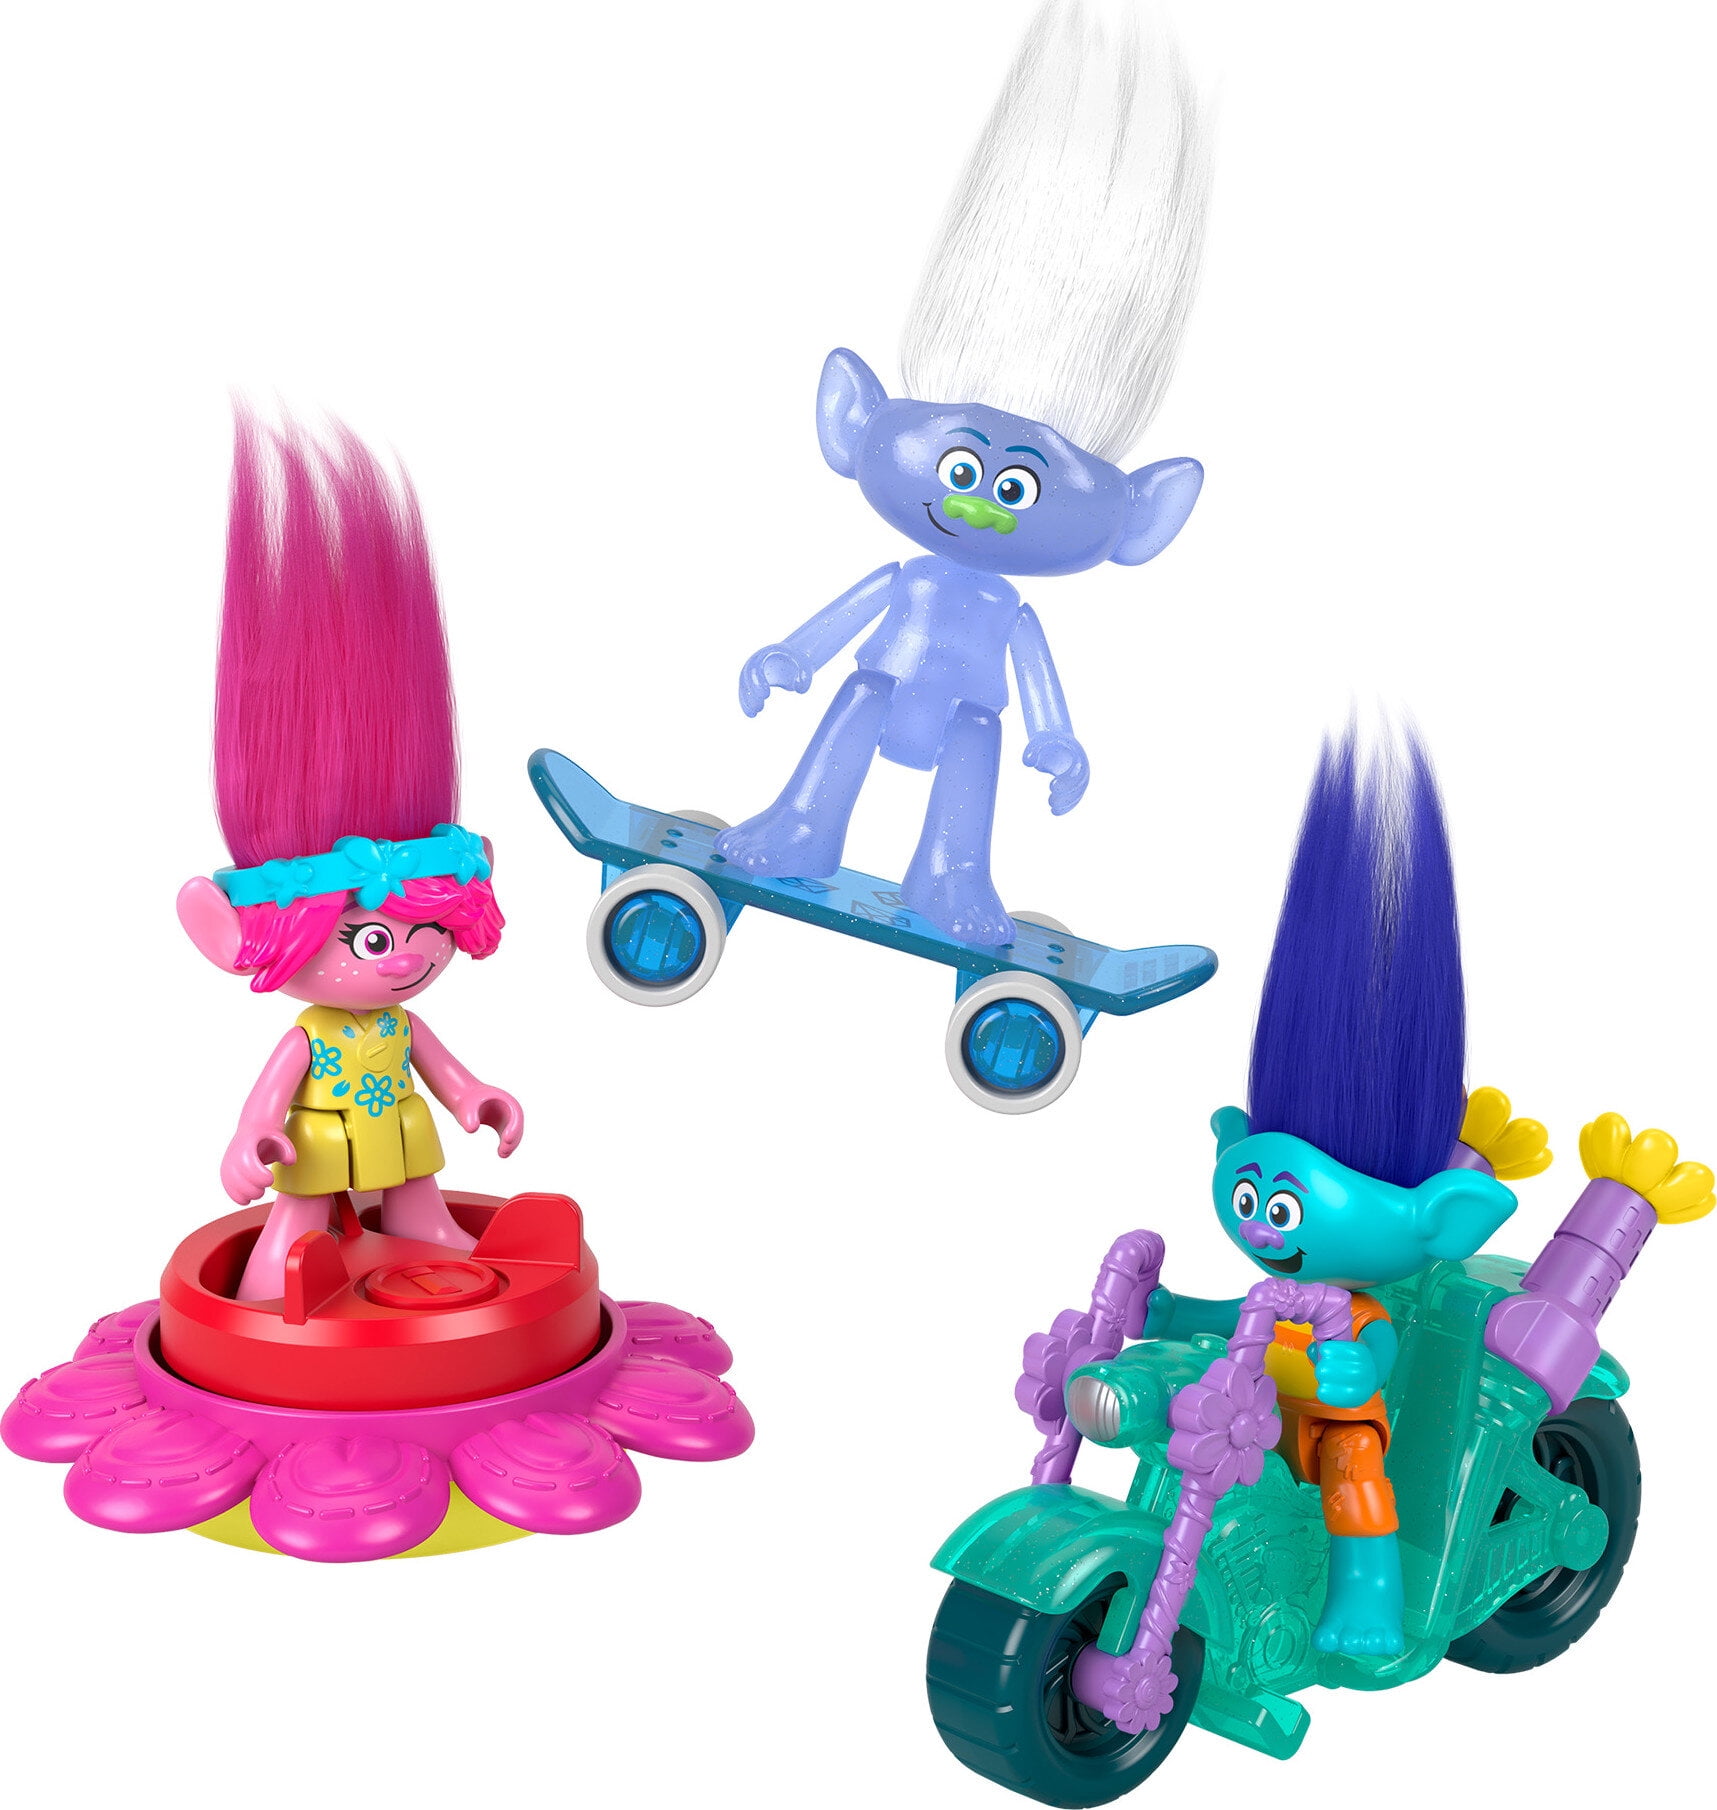  Dreamworks Troll Dolls 4 Pack Exclusive 9 Tall : Toys & Games